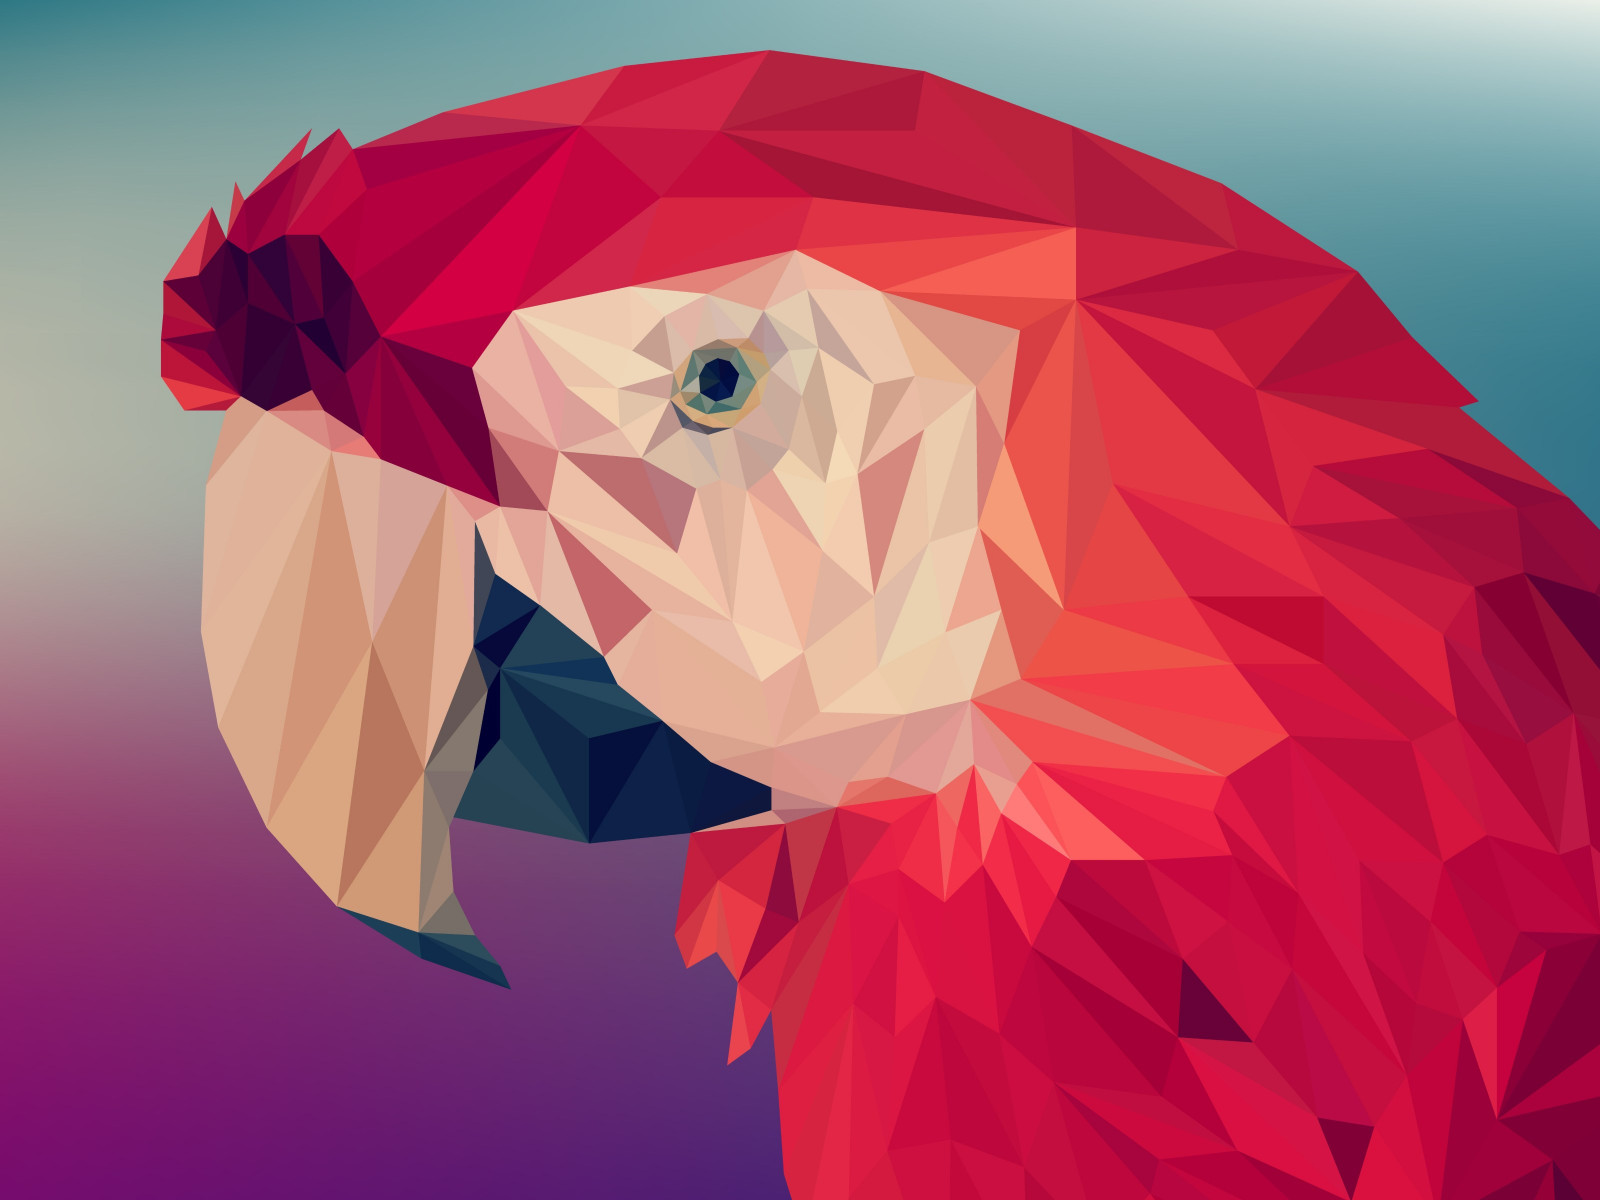 Low poly art: Red parrot wallpaper 1600x1200